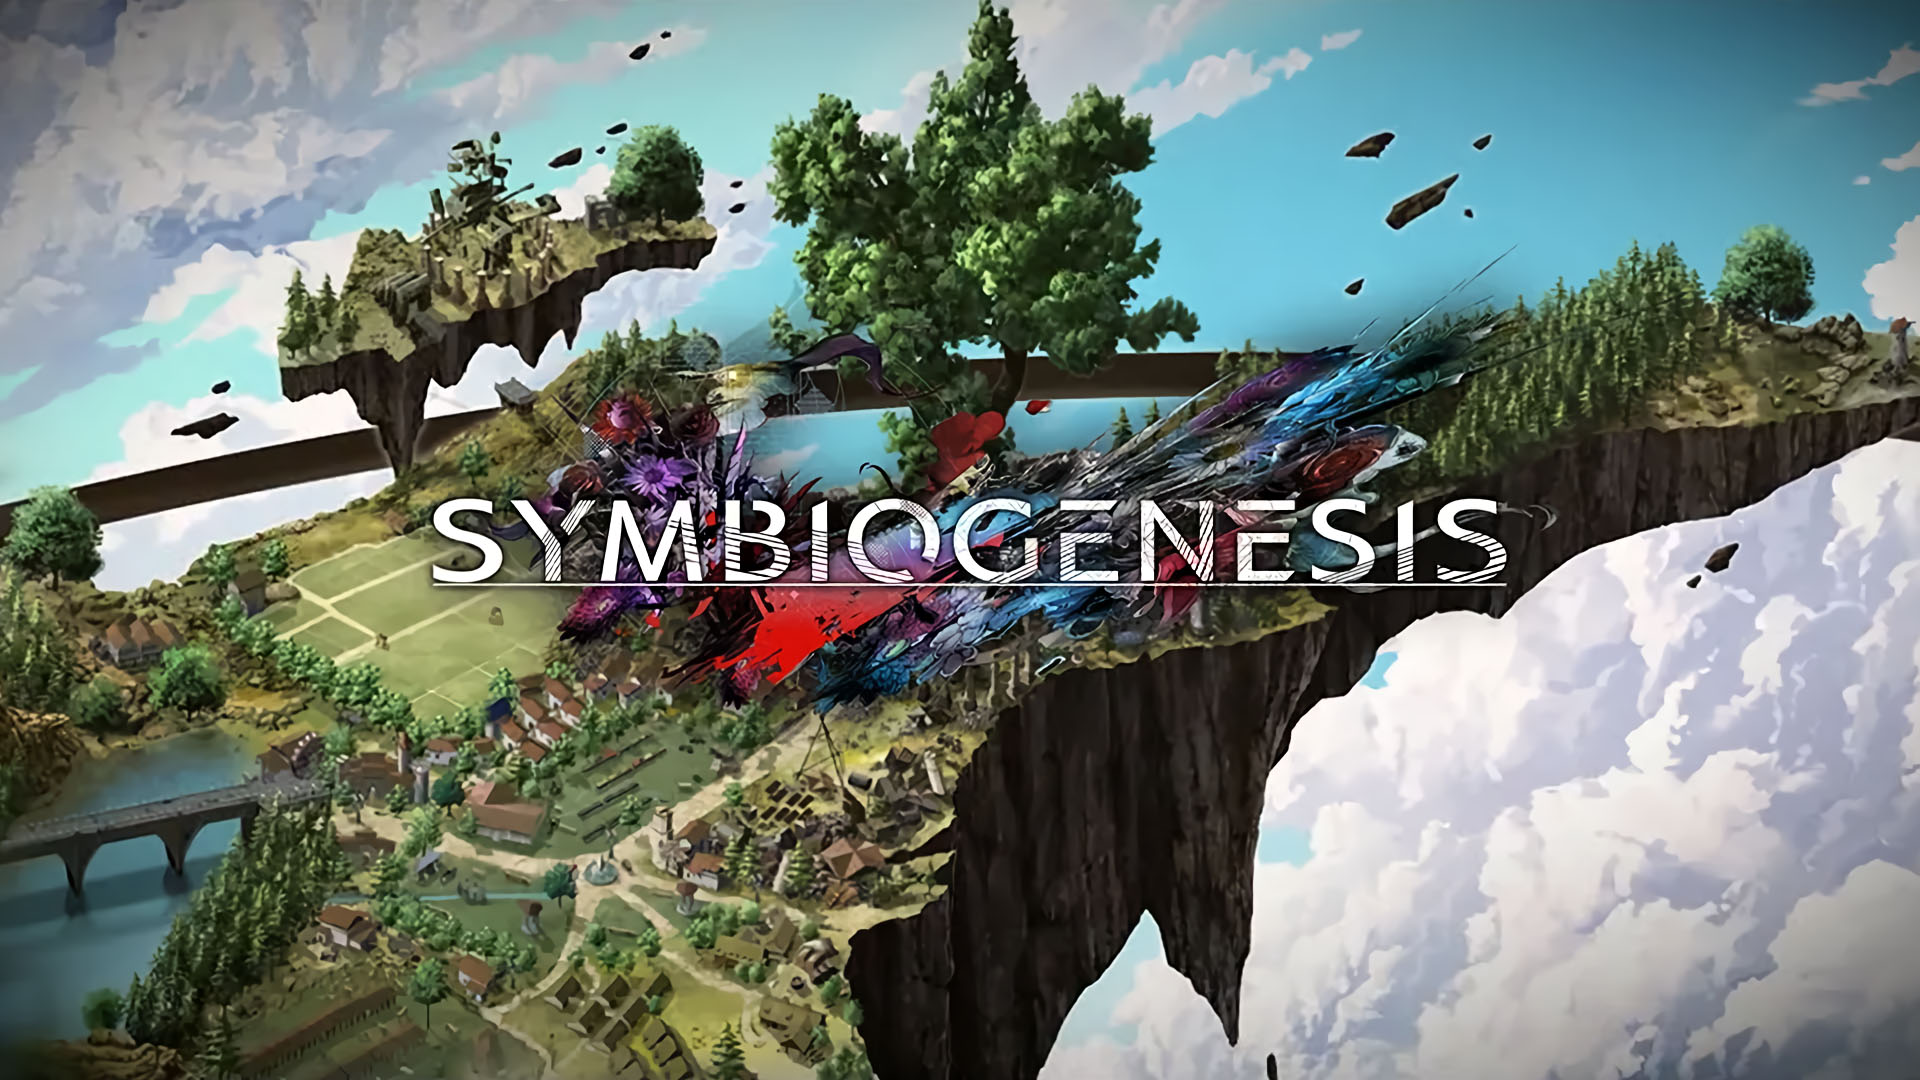 Square Enix reveals first Symbiogenesis teaser, has over 10,000 characters